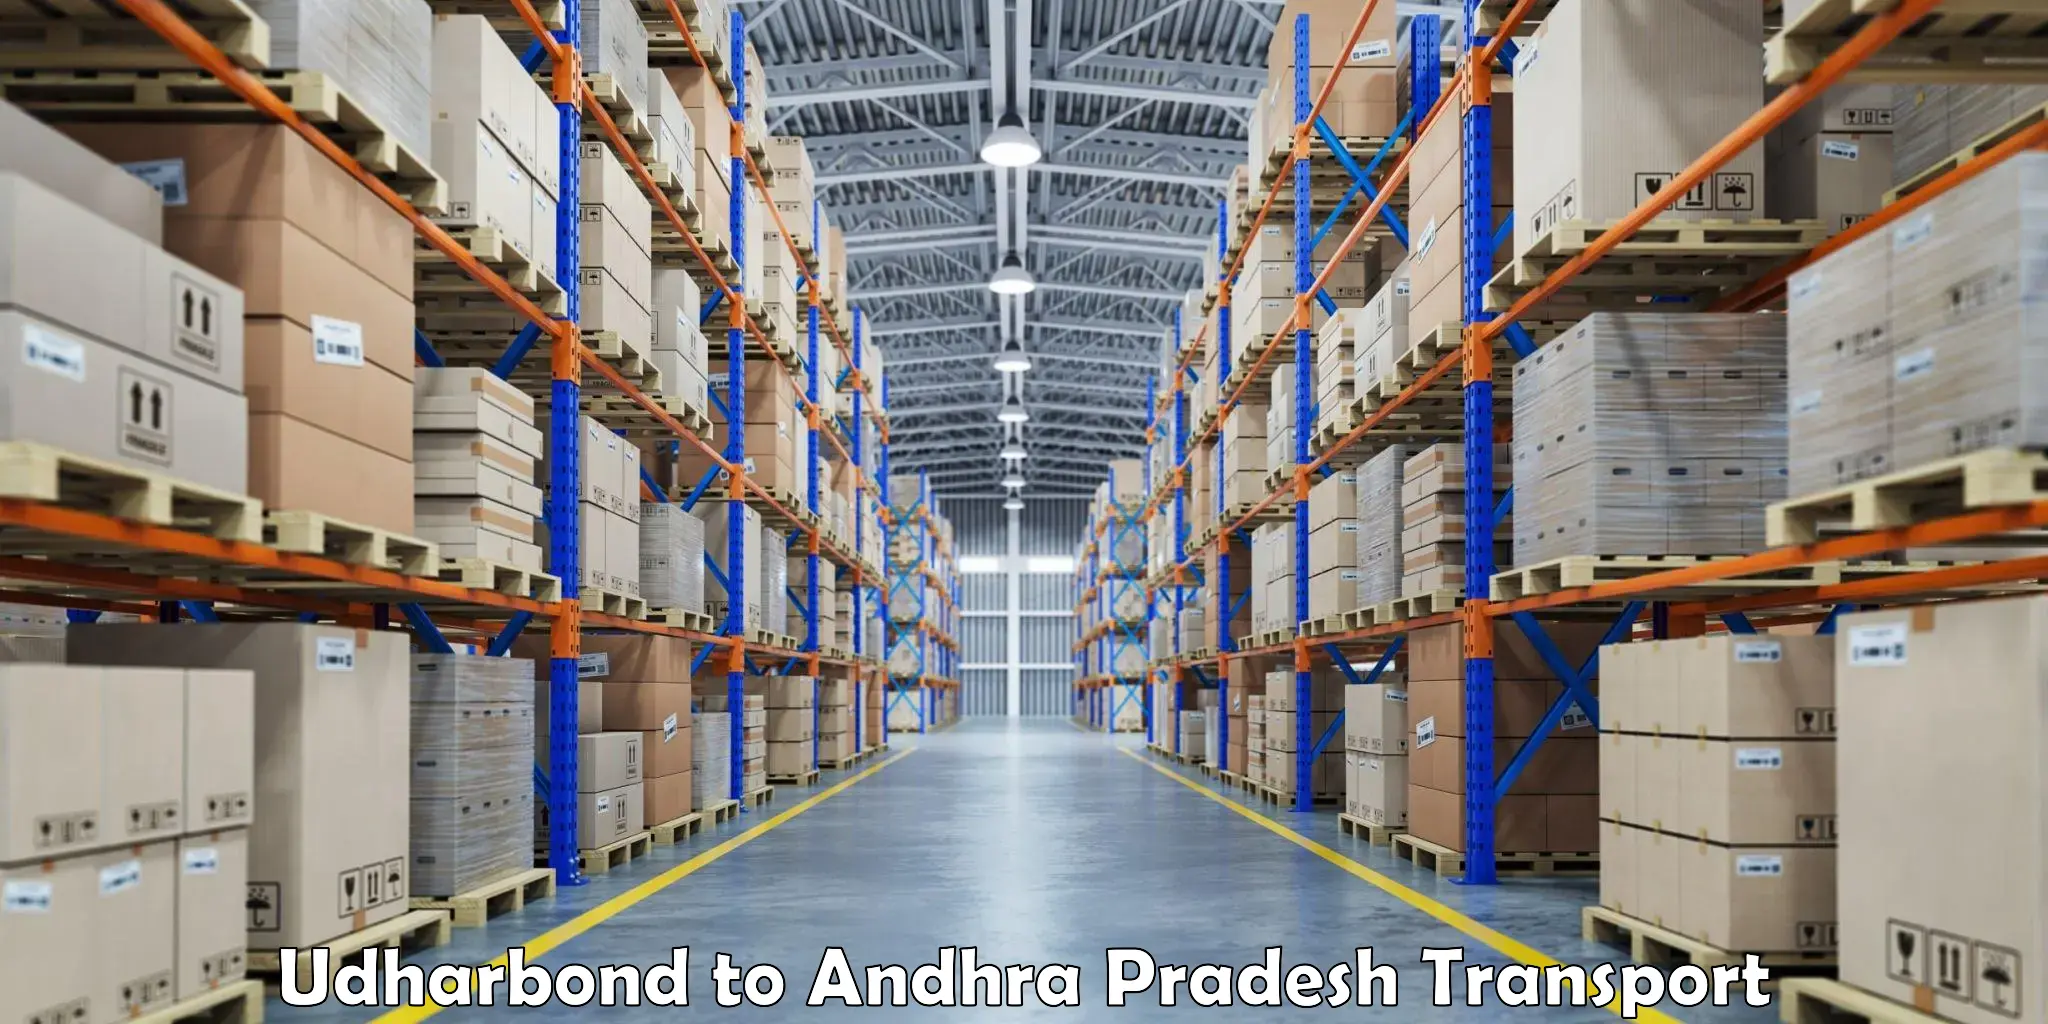 Truck transport companies in India Udharbond to Chitrada